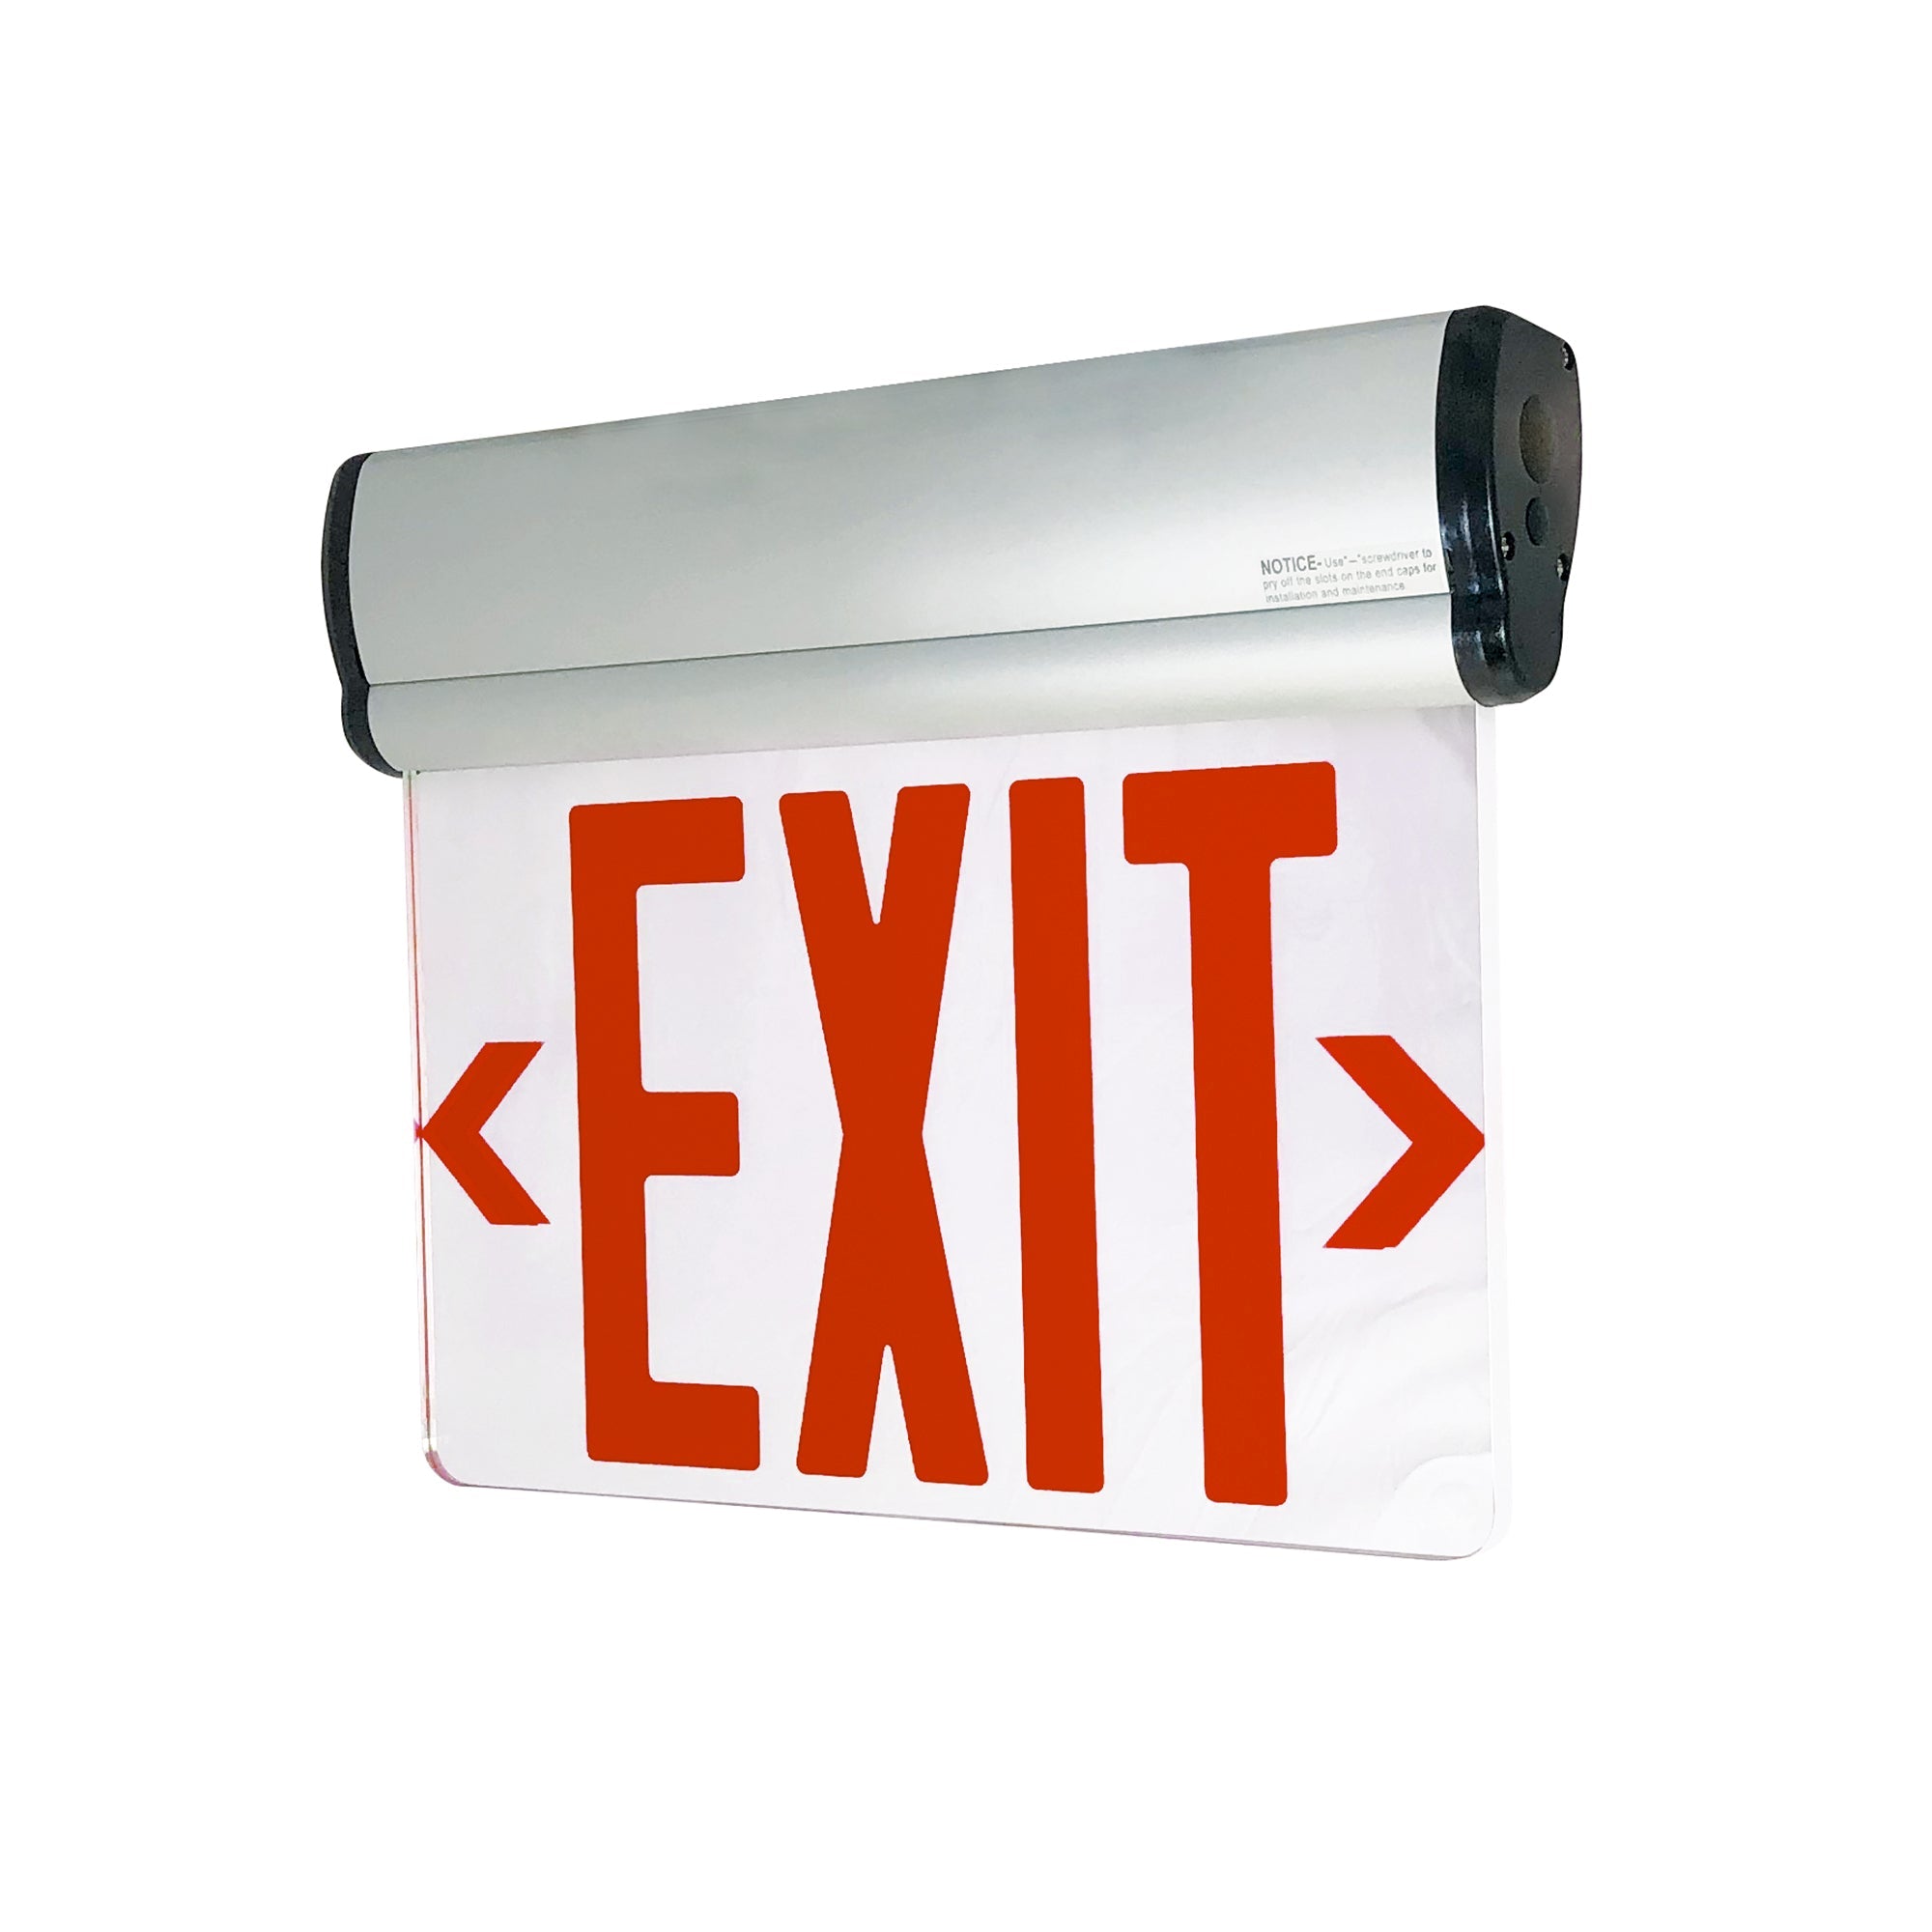 Nora Lighting NX-812-LEDRMA - Exit / Emergency - Surface Adjustable LED Edge-Lit Exit Sign, Battery Backup, 6 Inch Red Letters, Single Face / Mirrored Acrylic, Aluminum Housing